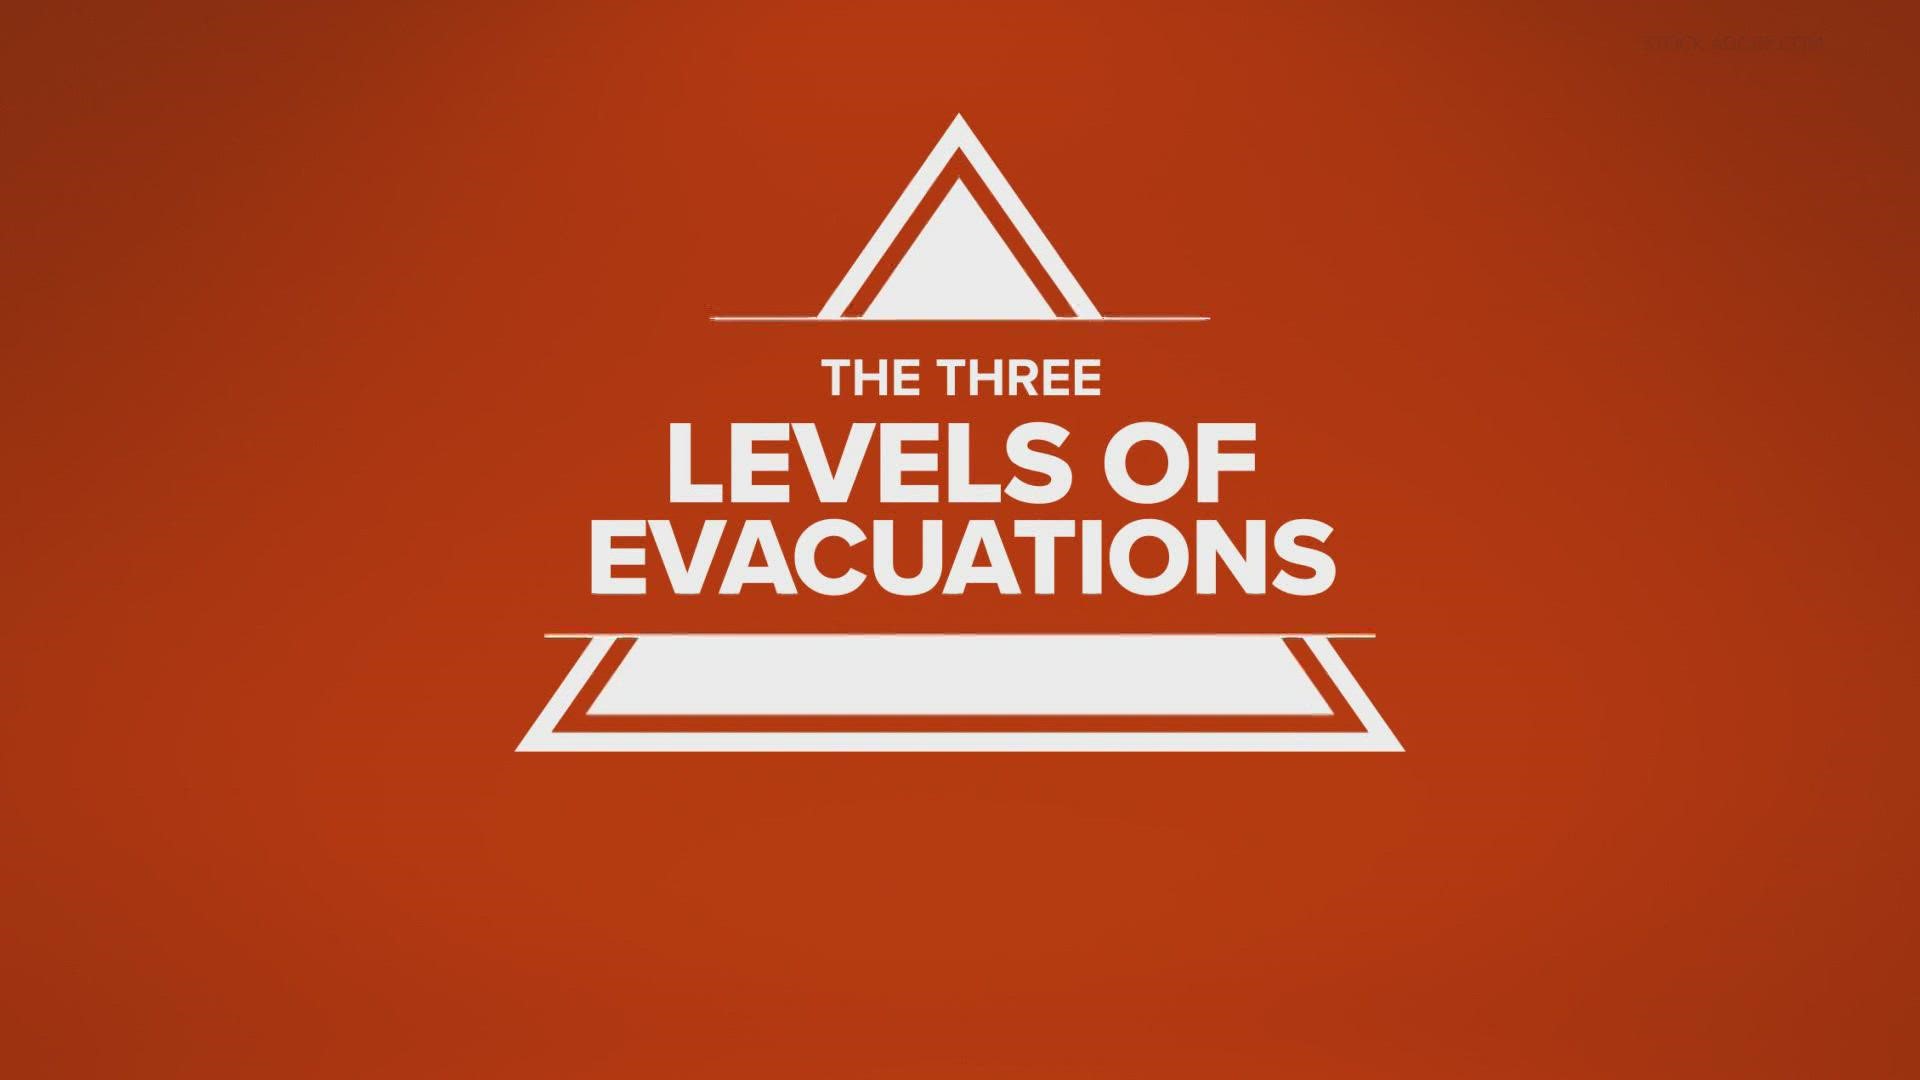 As wildfire season starts to pick up in the Inland Northwest, KREM 2 wants to provide you with a go-to guide for understanding evacuation levels.